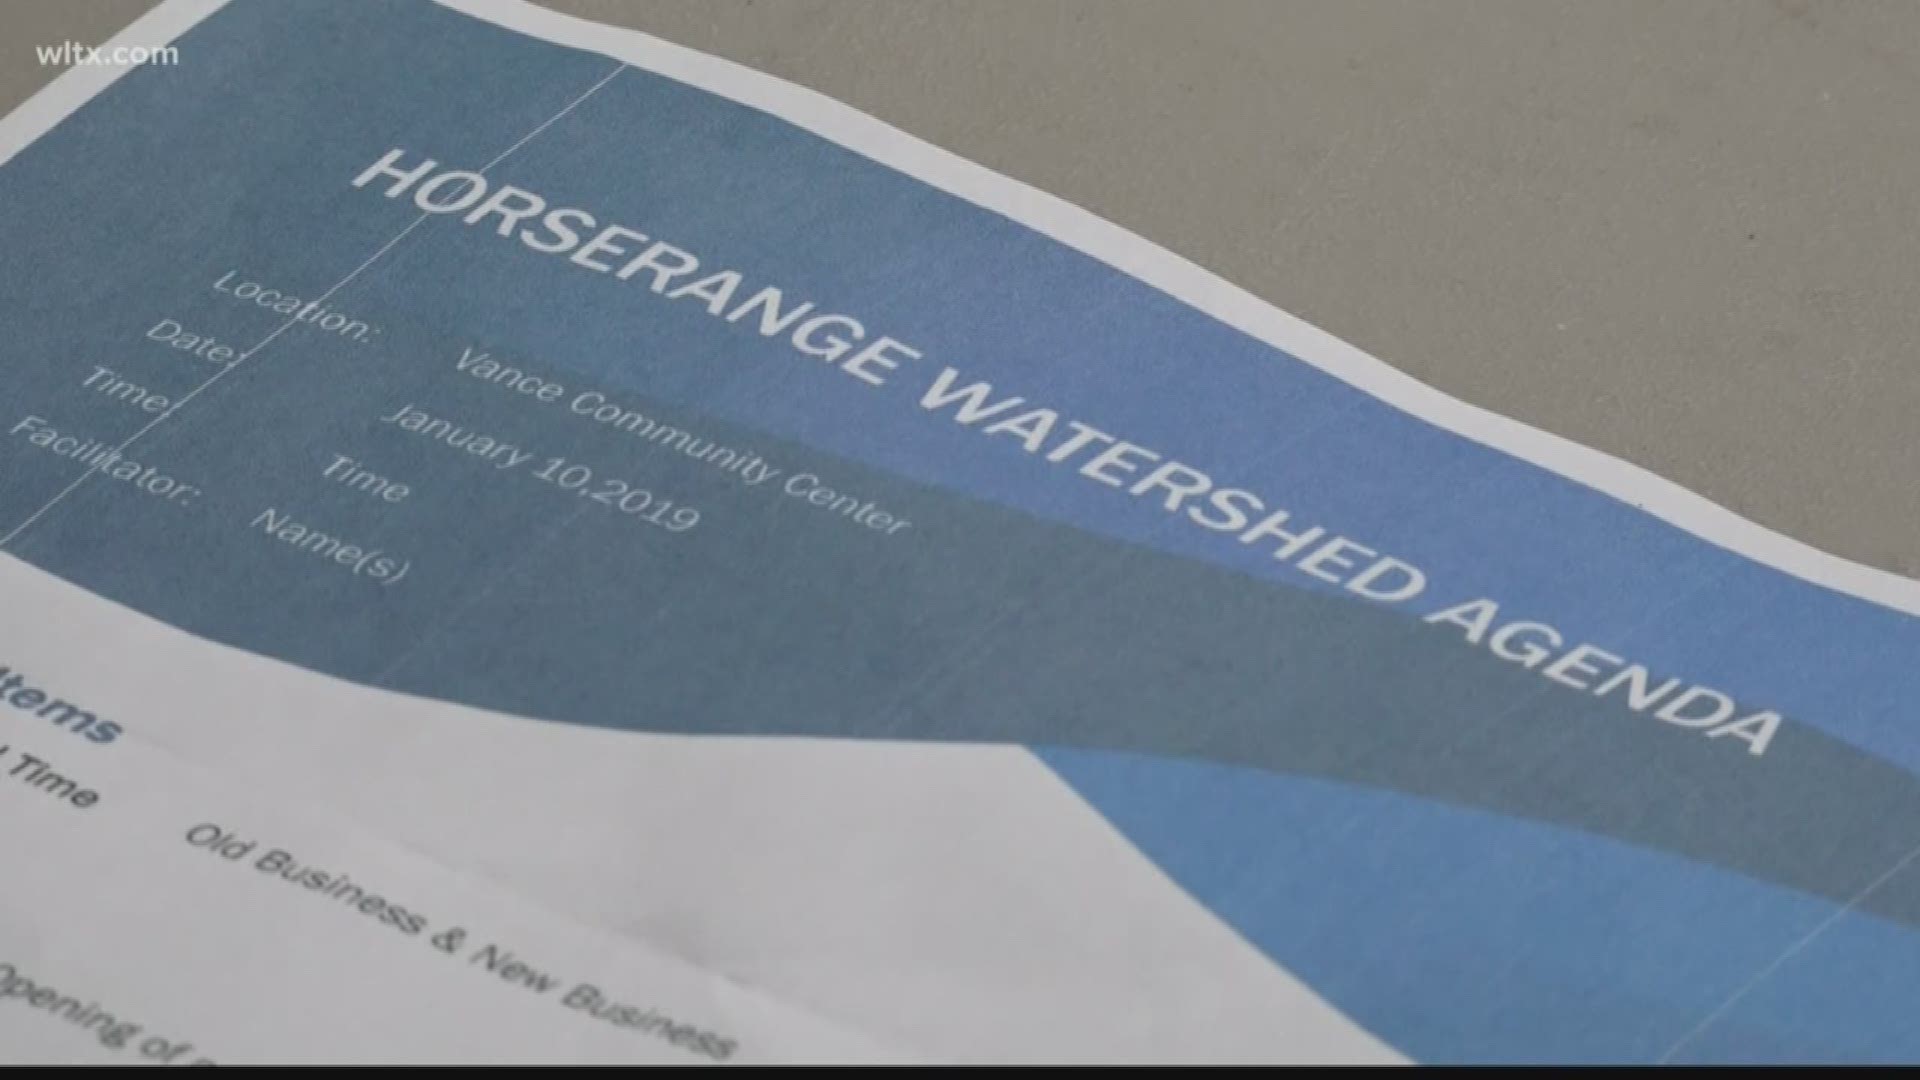 Residents in Orangeburg living along the Horse Ranch watershed are expressing their concern over recurring flooding in the area.